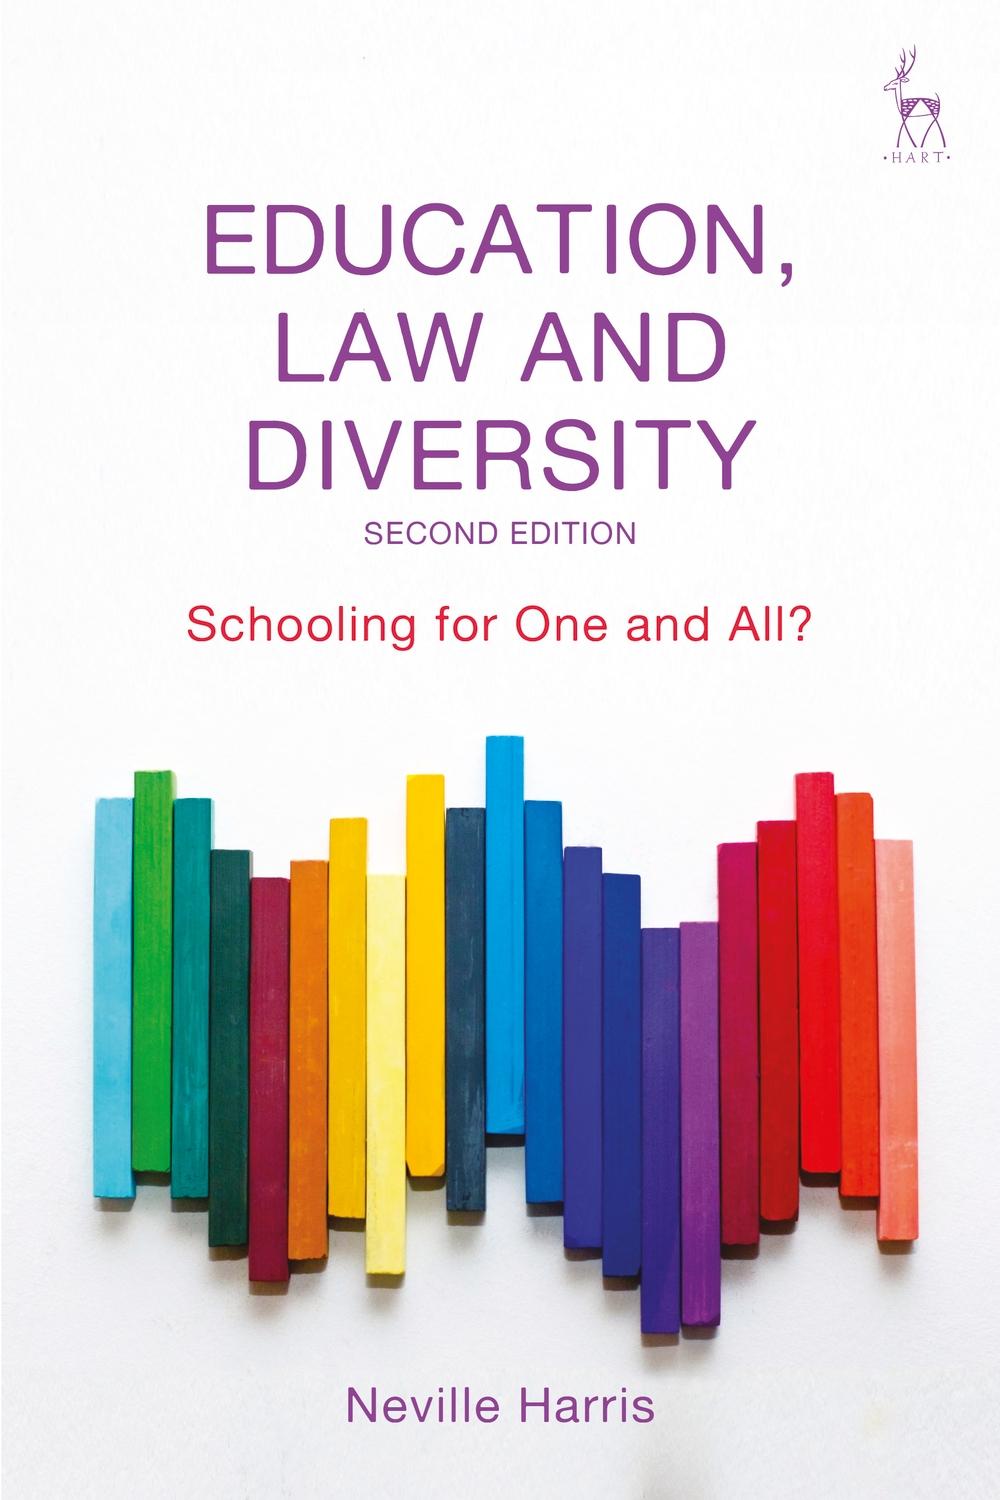 Education, Law and Diversity - Neville Harris